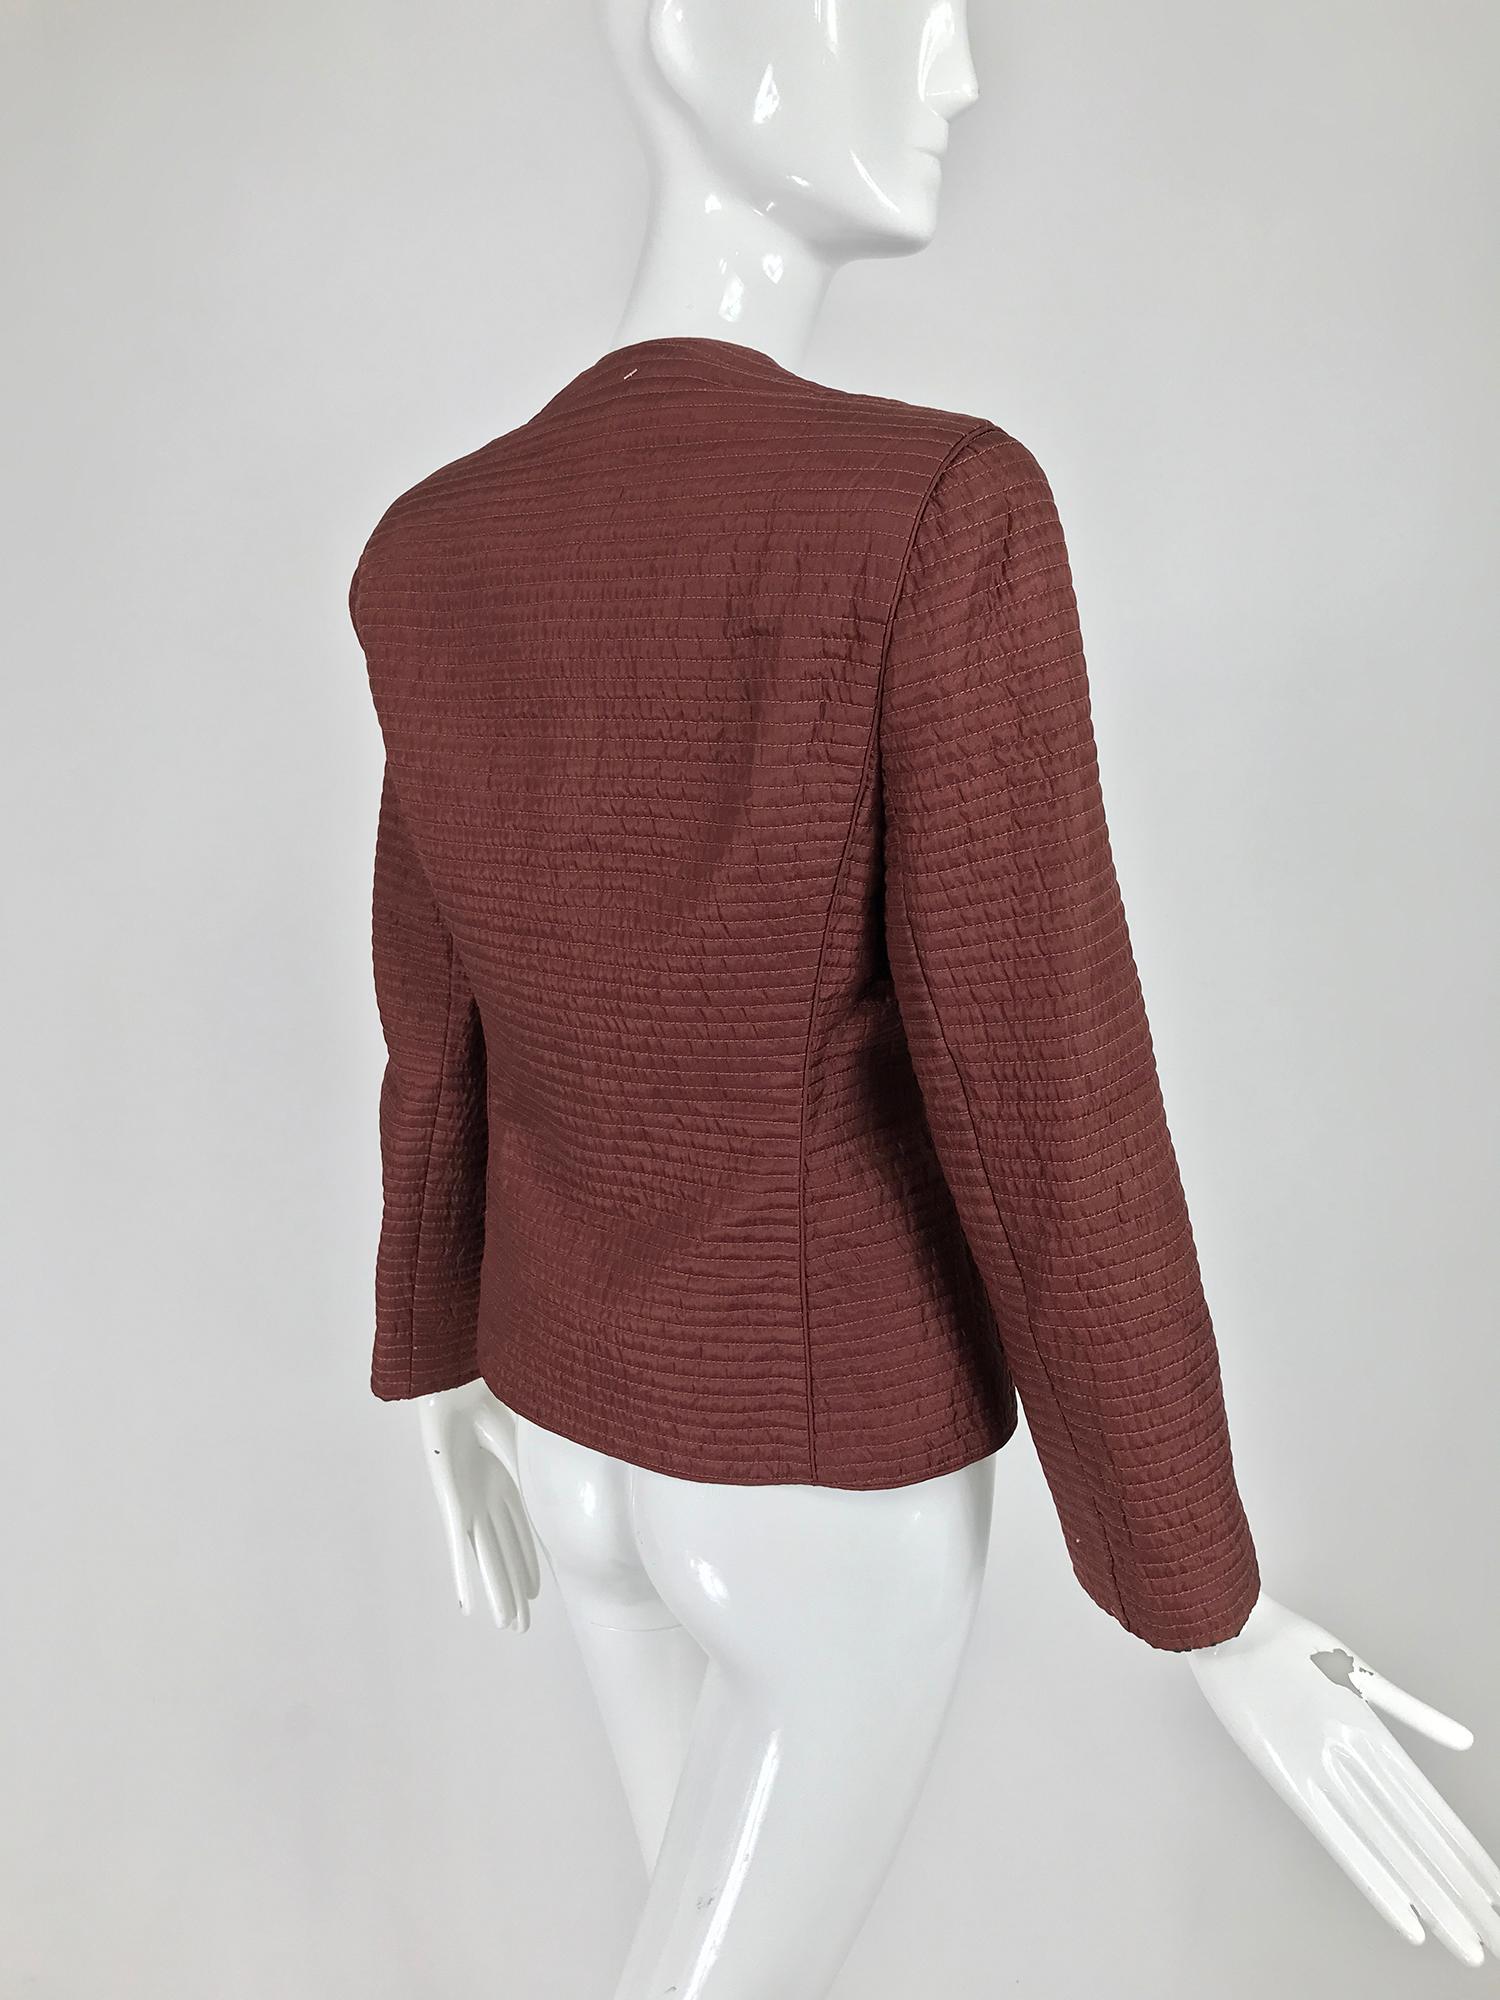 Mary McFadden Quilted Jacket in Rich Raisin Brown 1970s 1